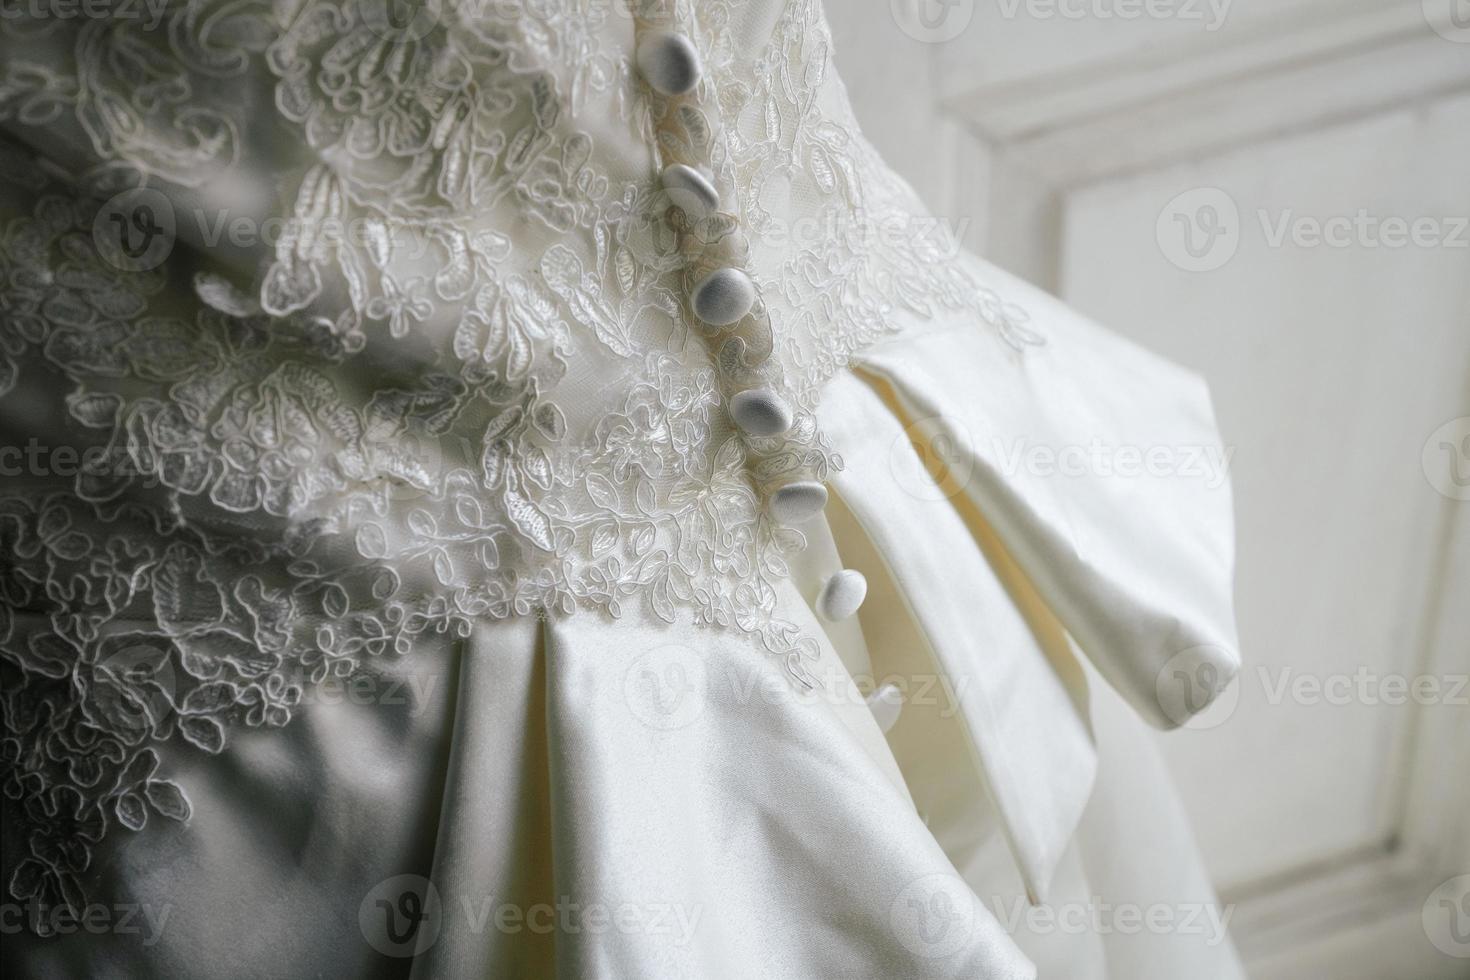 Girl in a wedding dress close-up photo